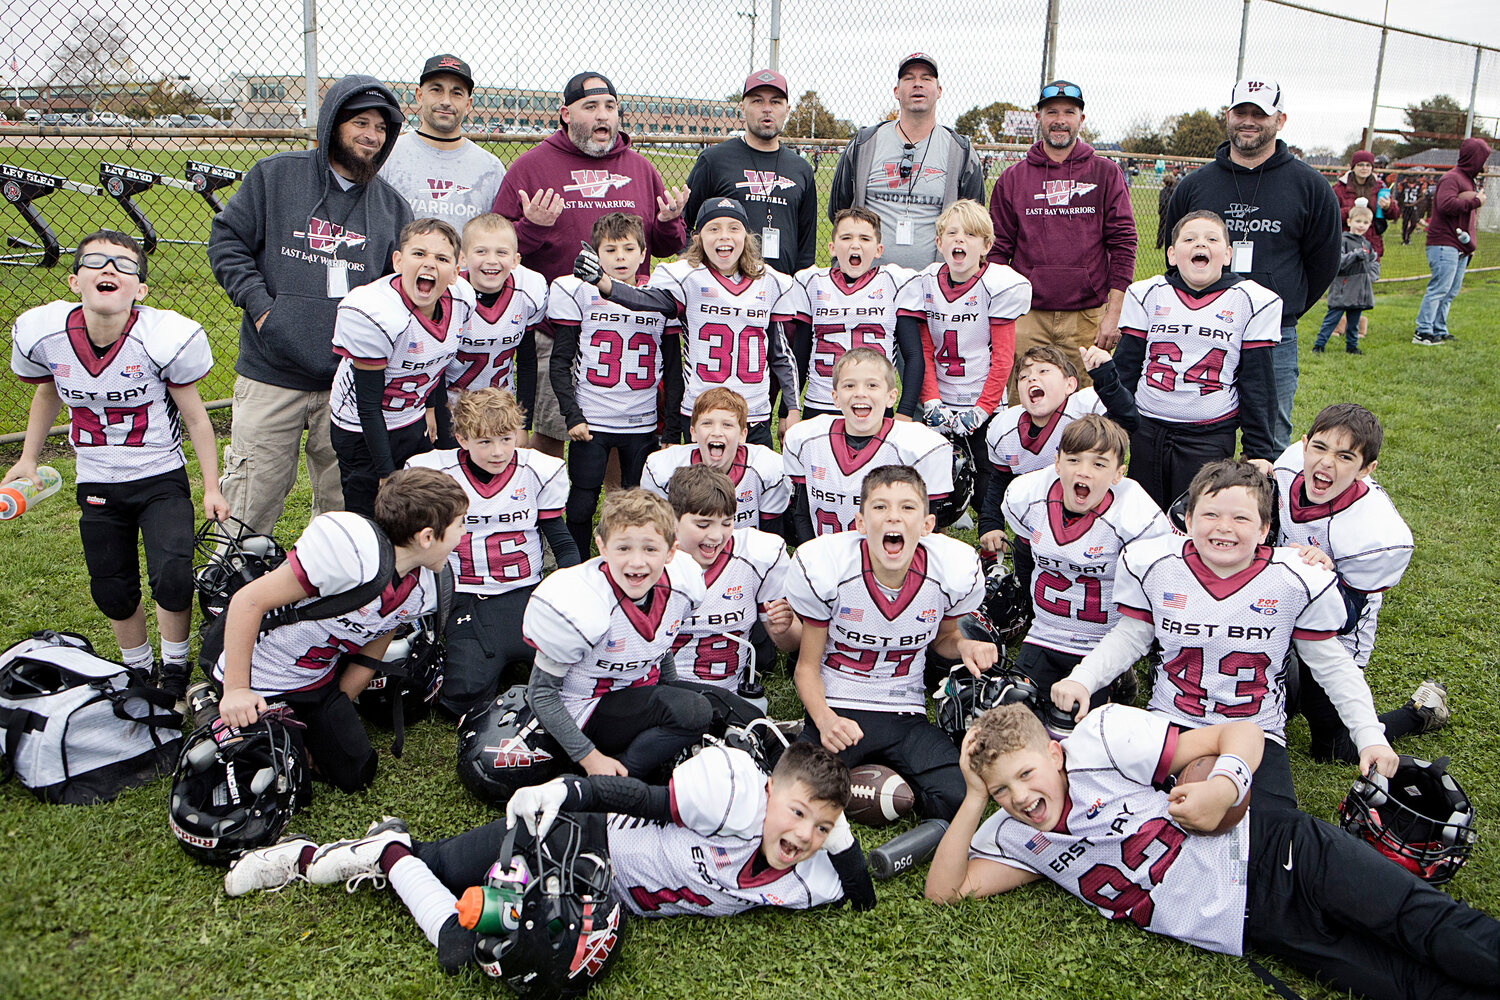 The 8U team celebrates an overtime victory against an undefeated Edgewood team in the semifinals on Oct. 29.